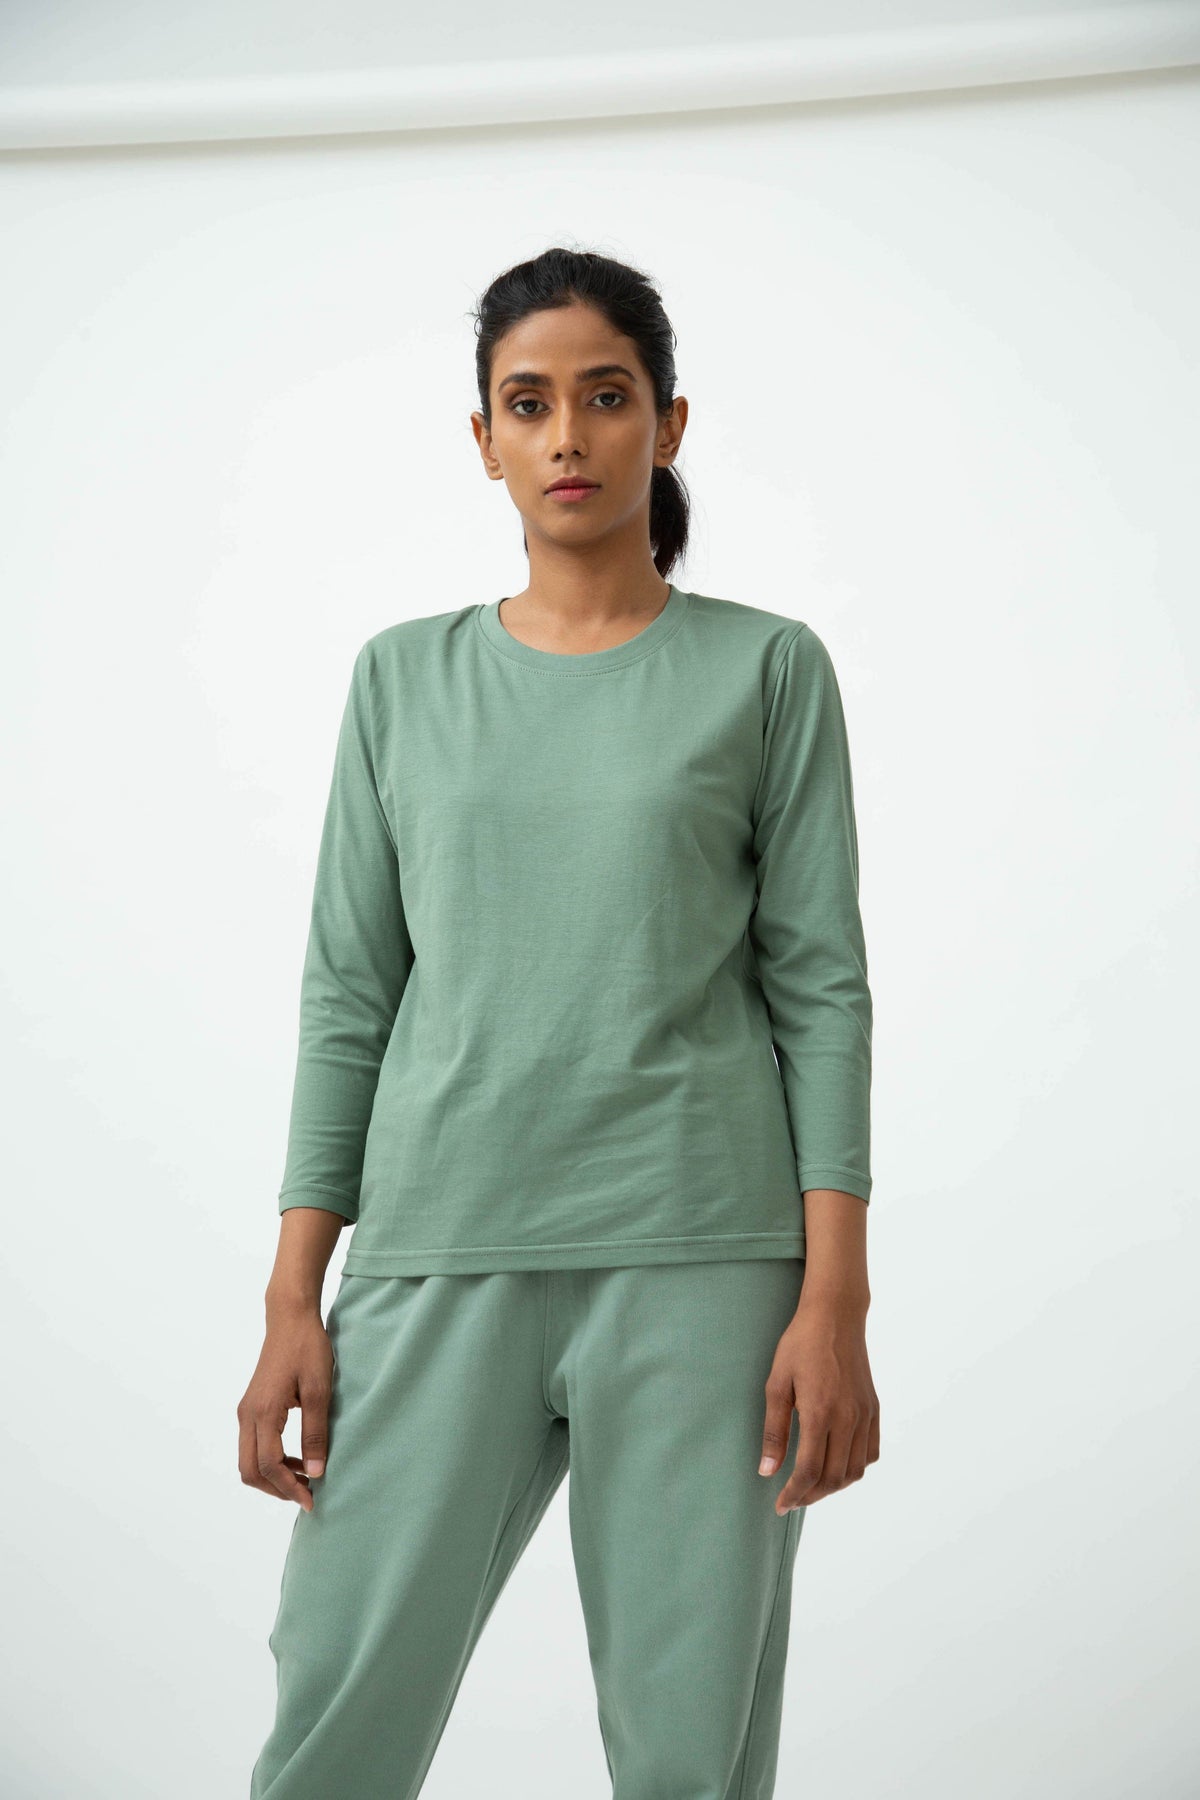 Saltpetre womens wear, lounge wear for casual wear.
 Comfortable crew neck, full sleeve t-shirt in sage green colour. Made from 100% organic cotton.